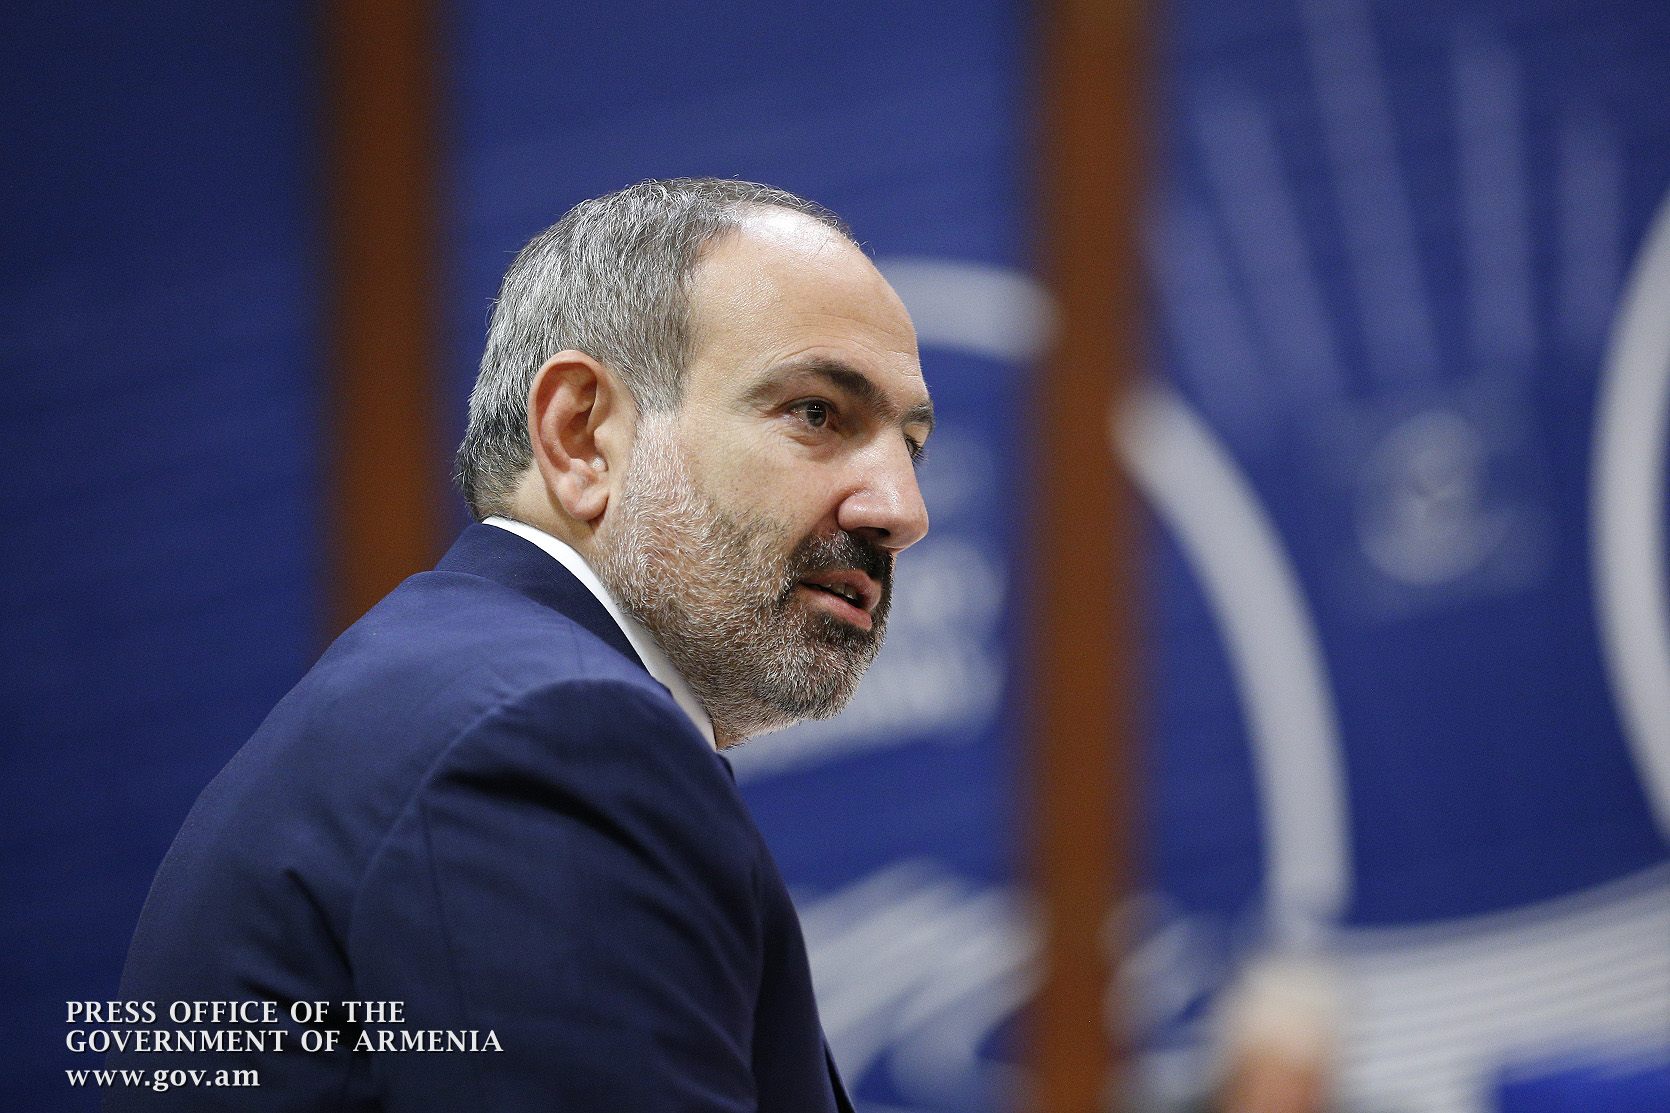 Nikol Pashinyan in PACE: ‘Armenia is today unequivocally a democratic country’